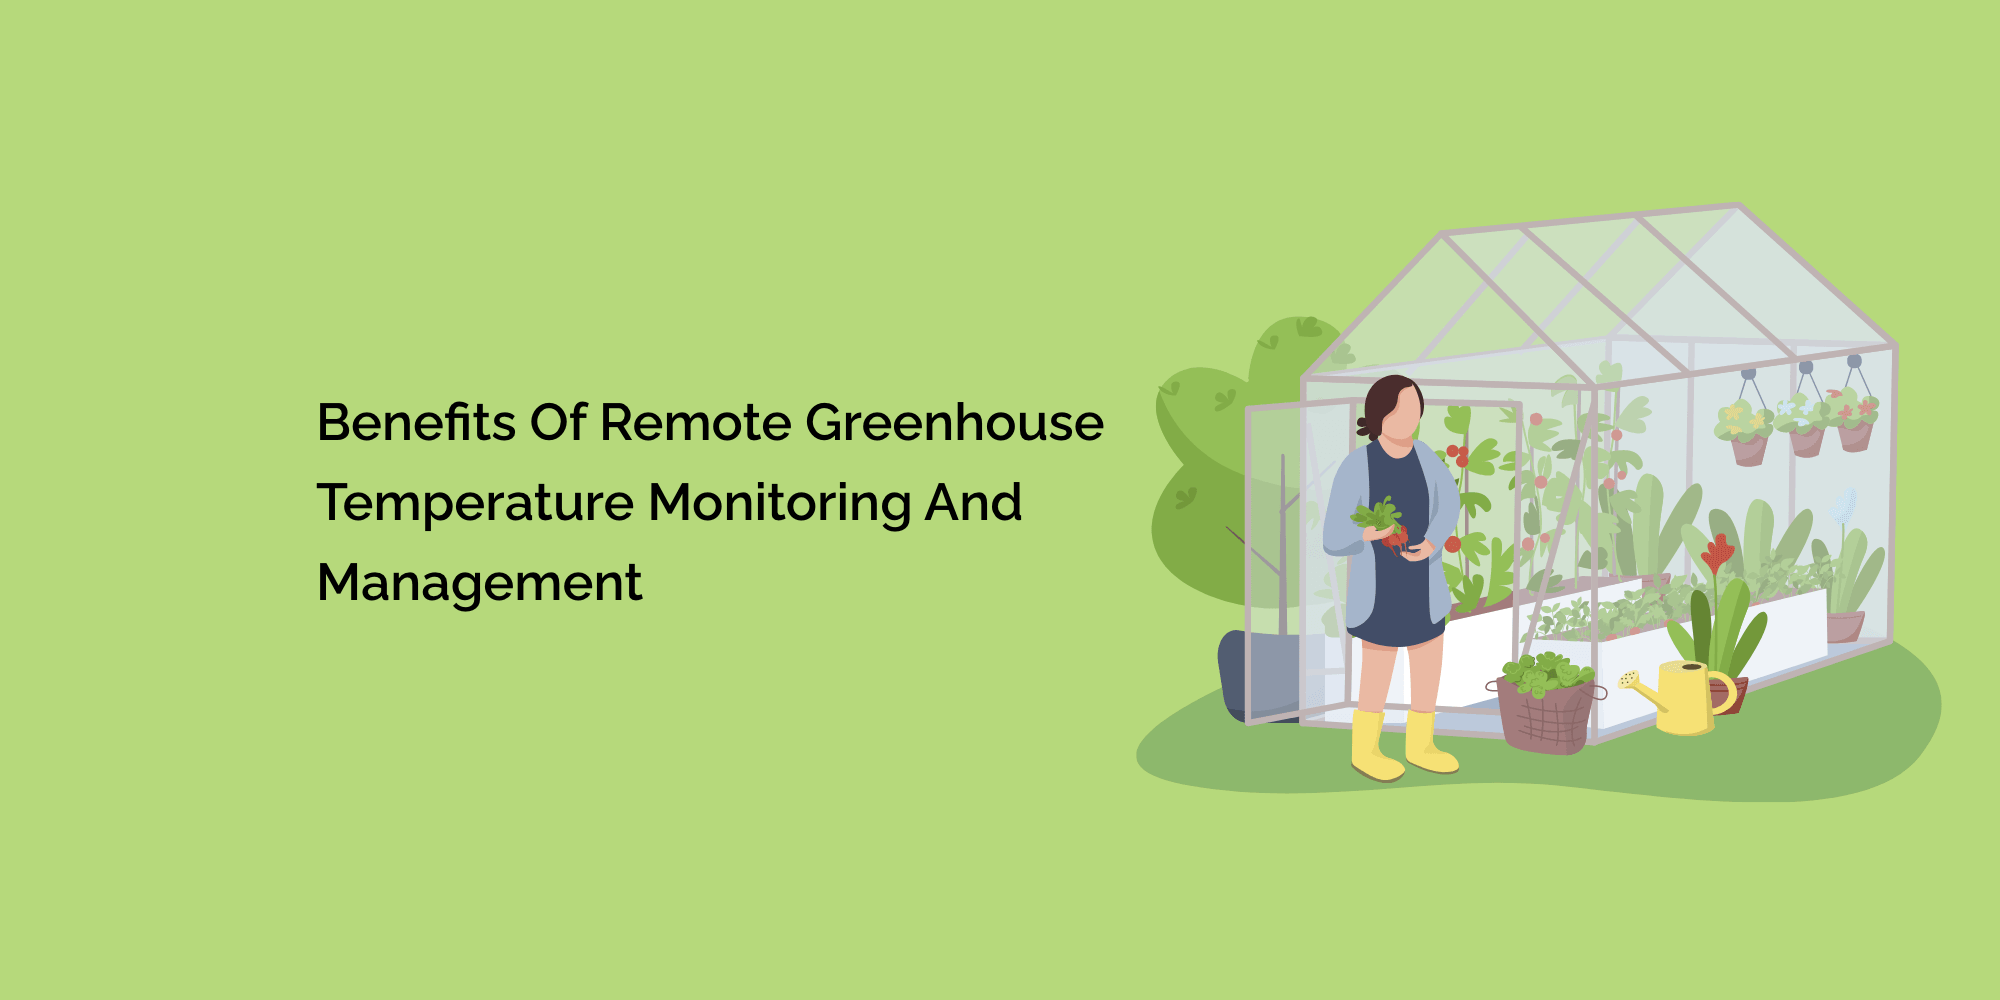 Benefits of Remote Greenhouse Temperature Monitoring and Management